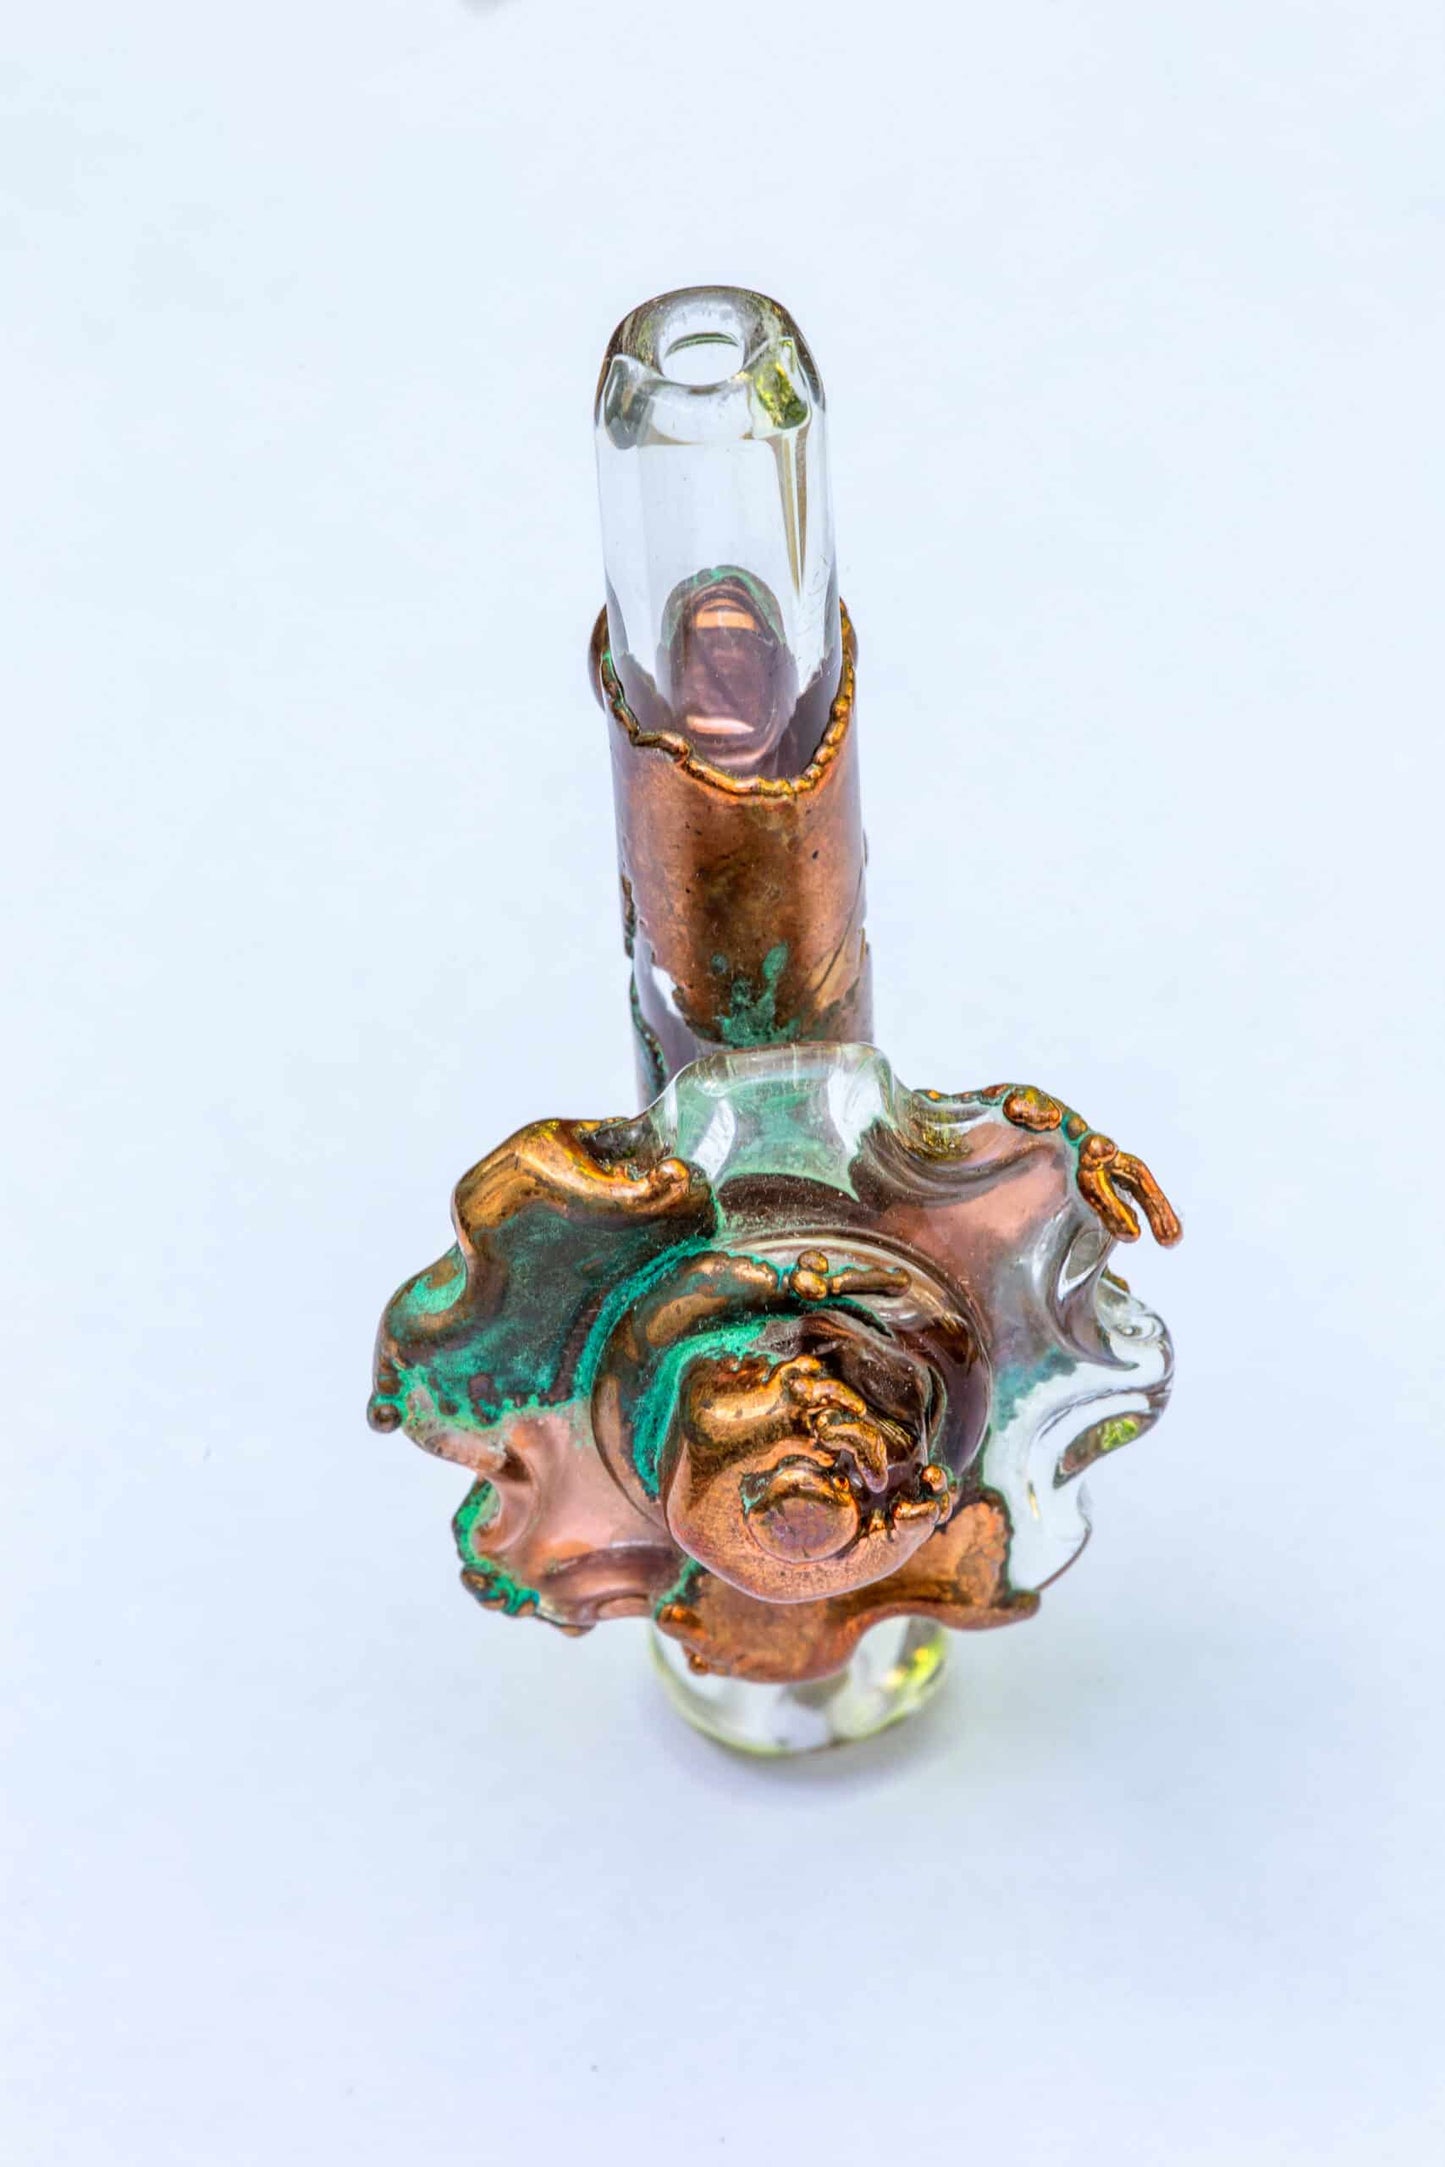 meticulously crafted art piece - Copper/Glass Onie by Snic Barnes x Zach P